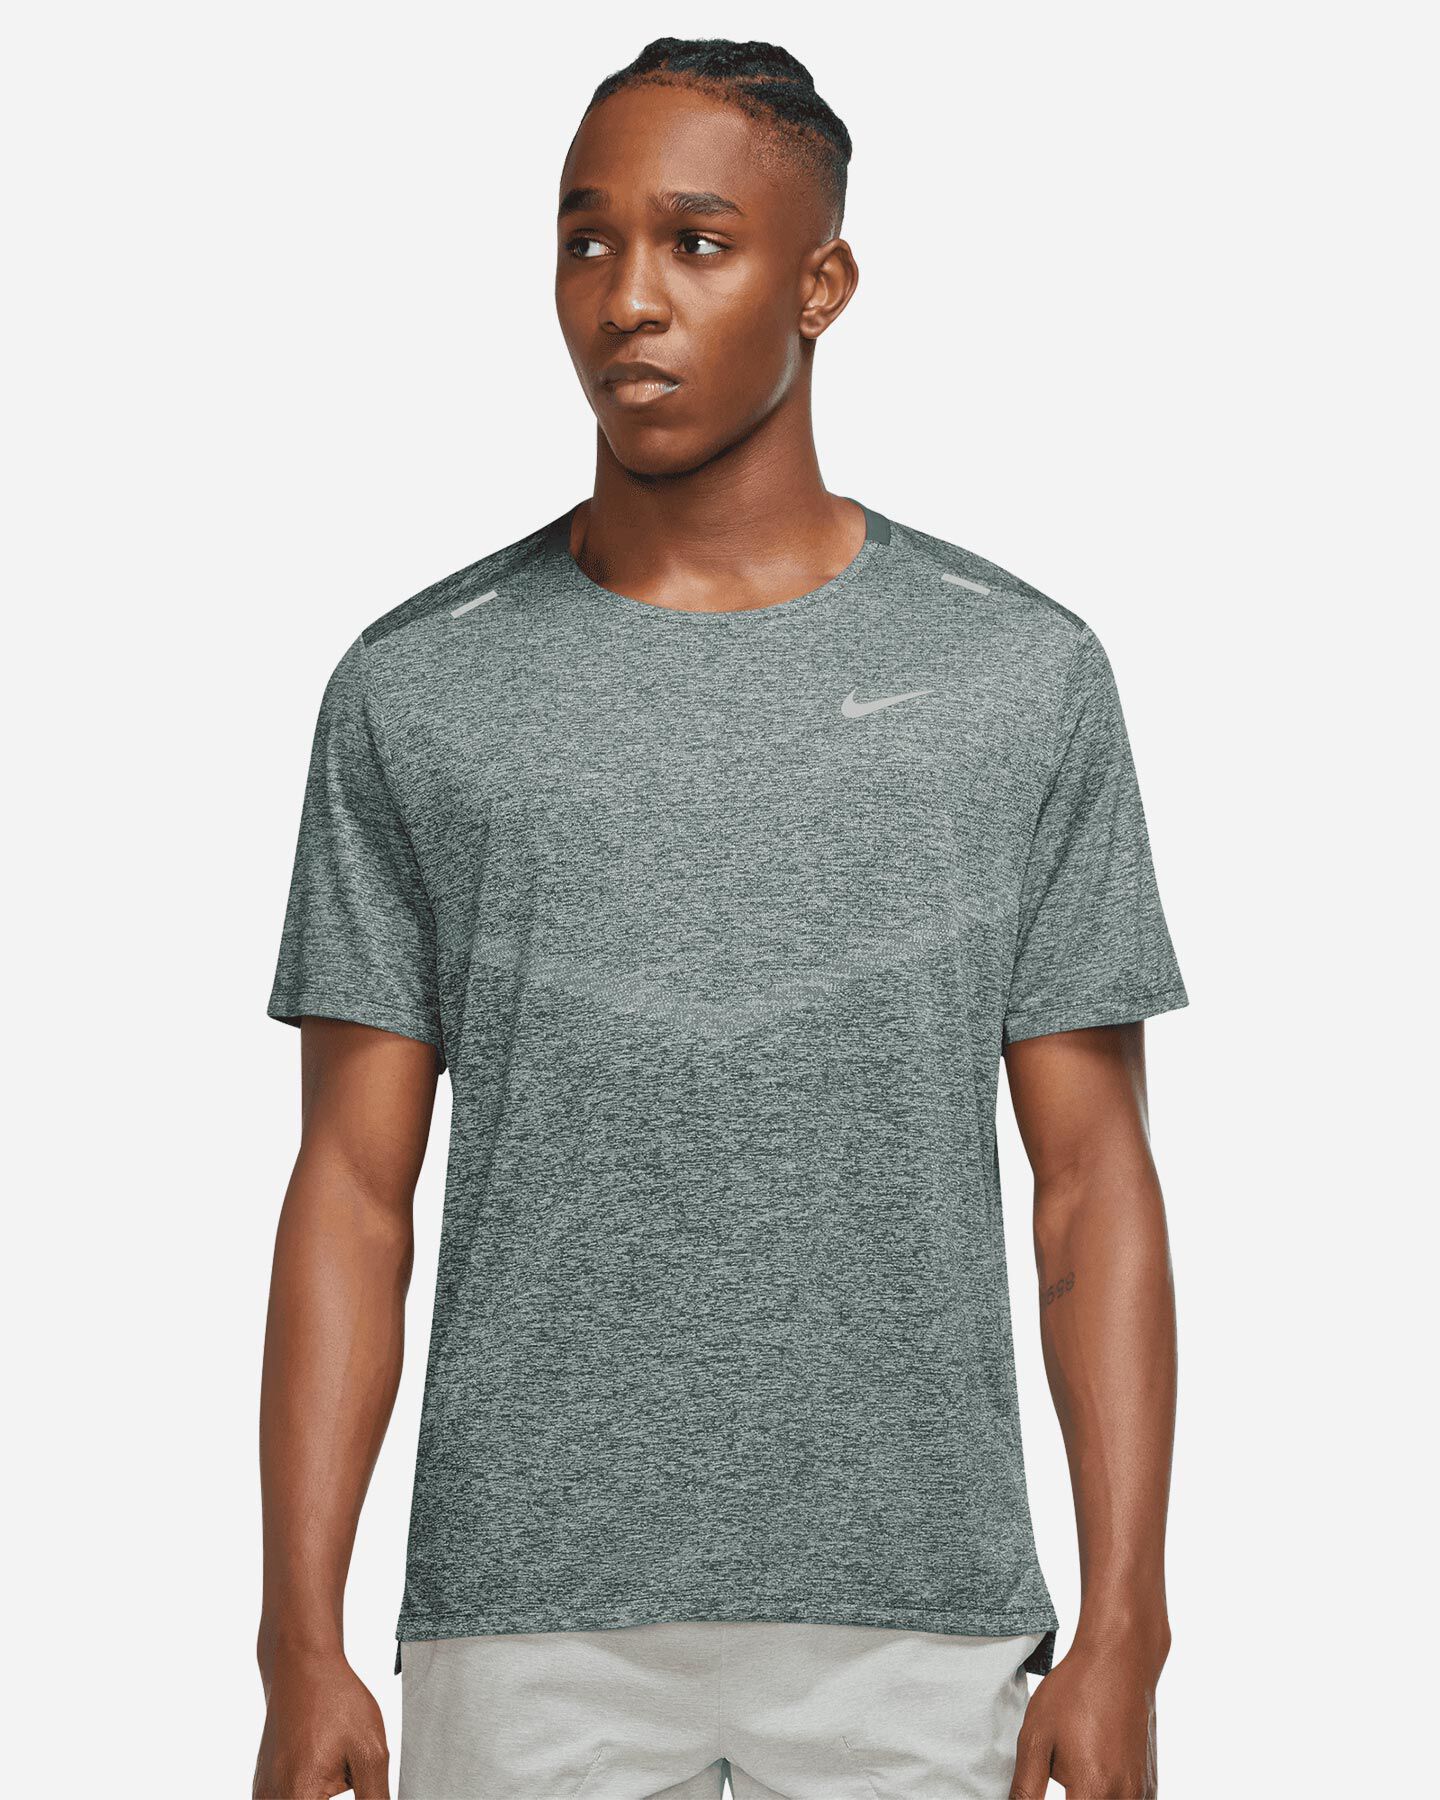  T-Shirt running NIKE DRI FIT RISE 365 M S5690186|338|S scatto 0